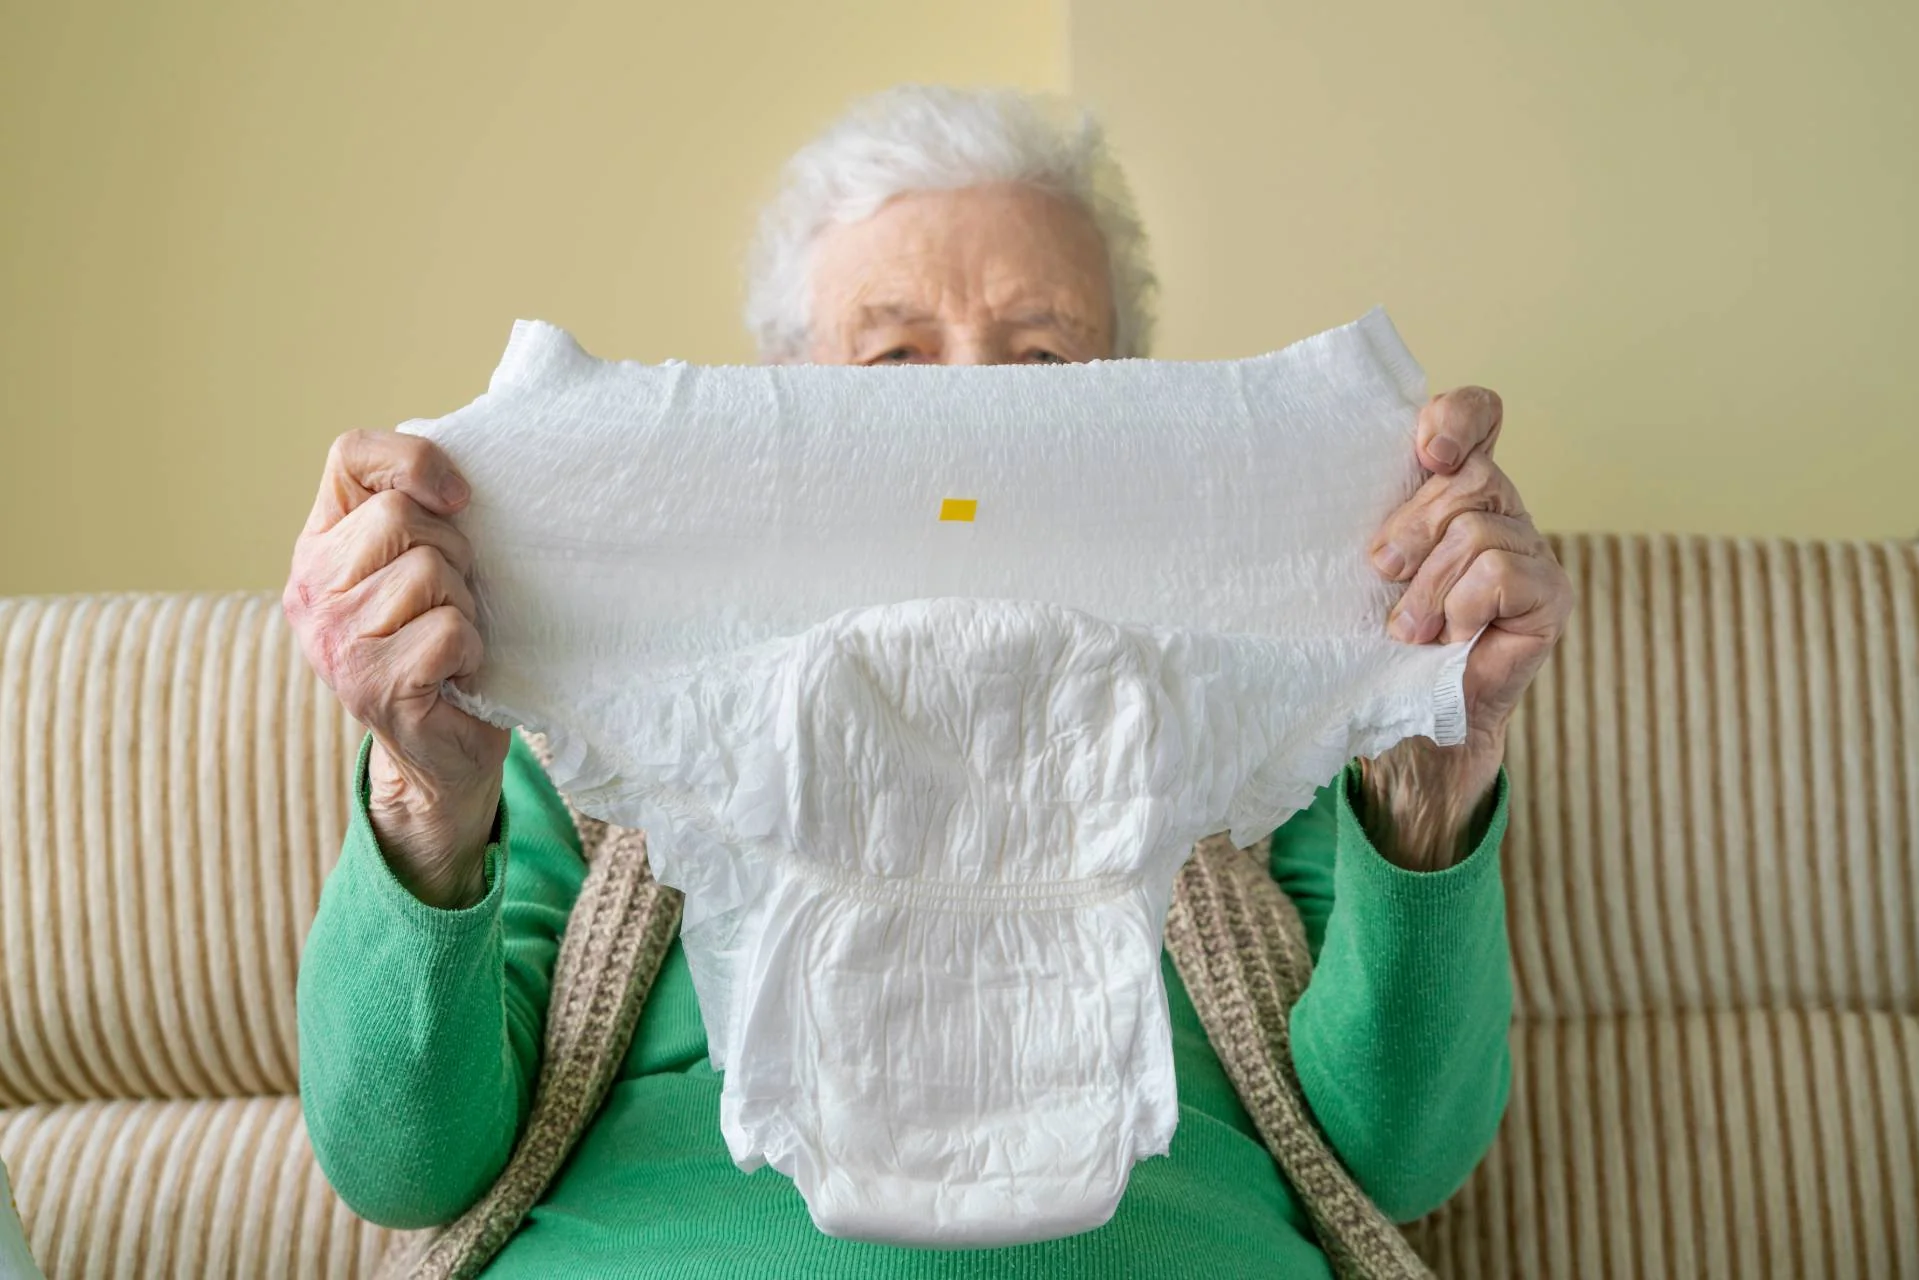 Discussion On-Put Back In Adult Diapers Full Time